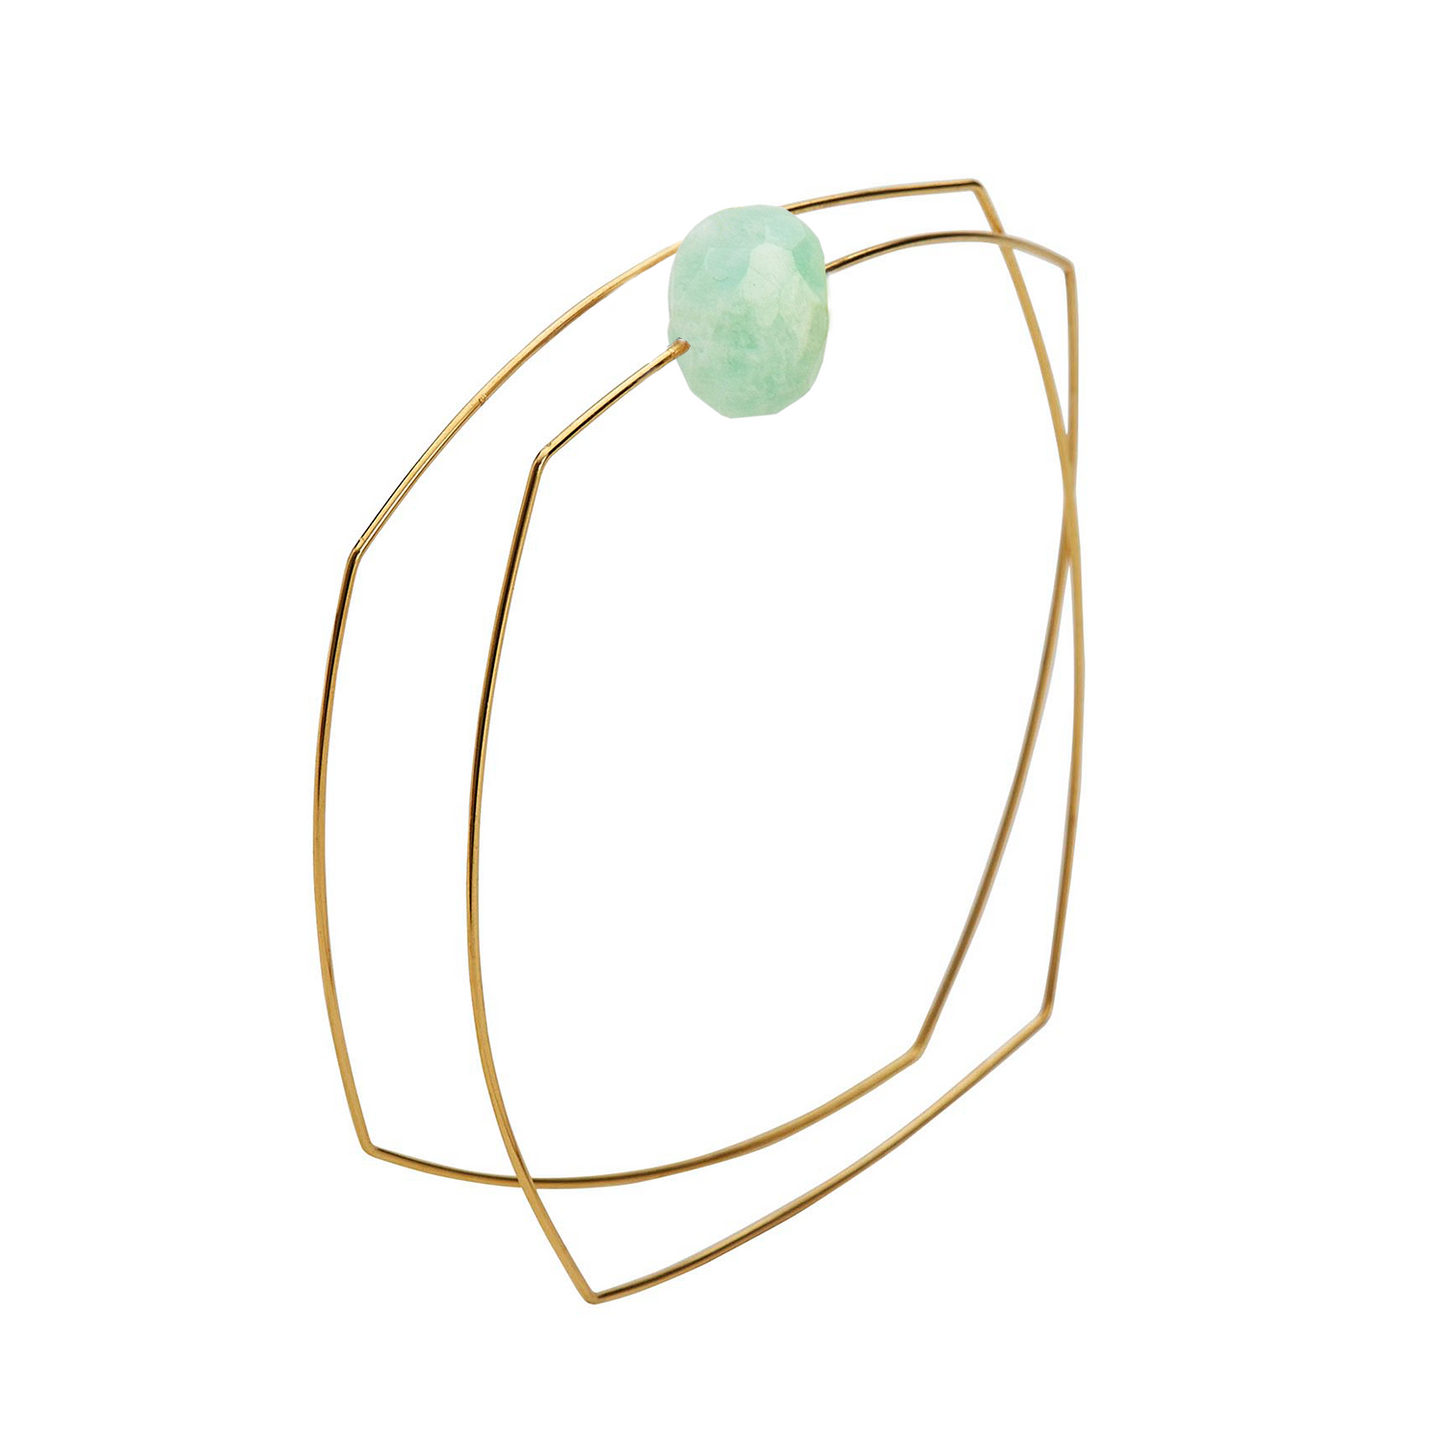 Square Wrap Bangle with hand-cut Gemstones